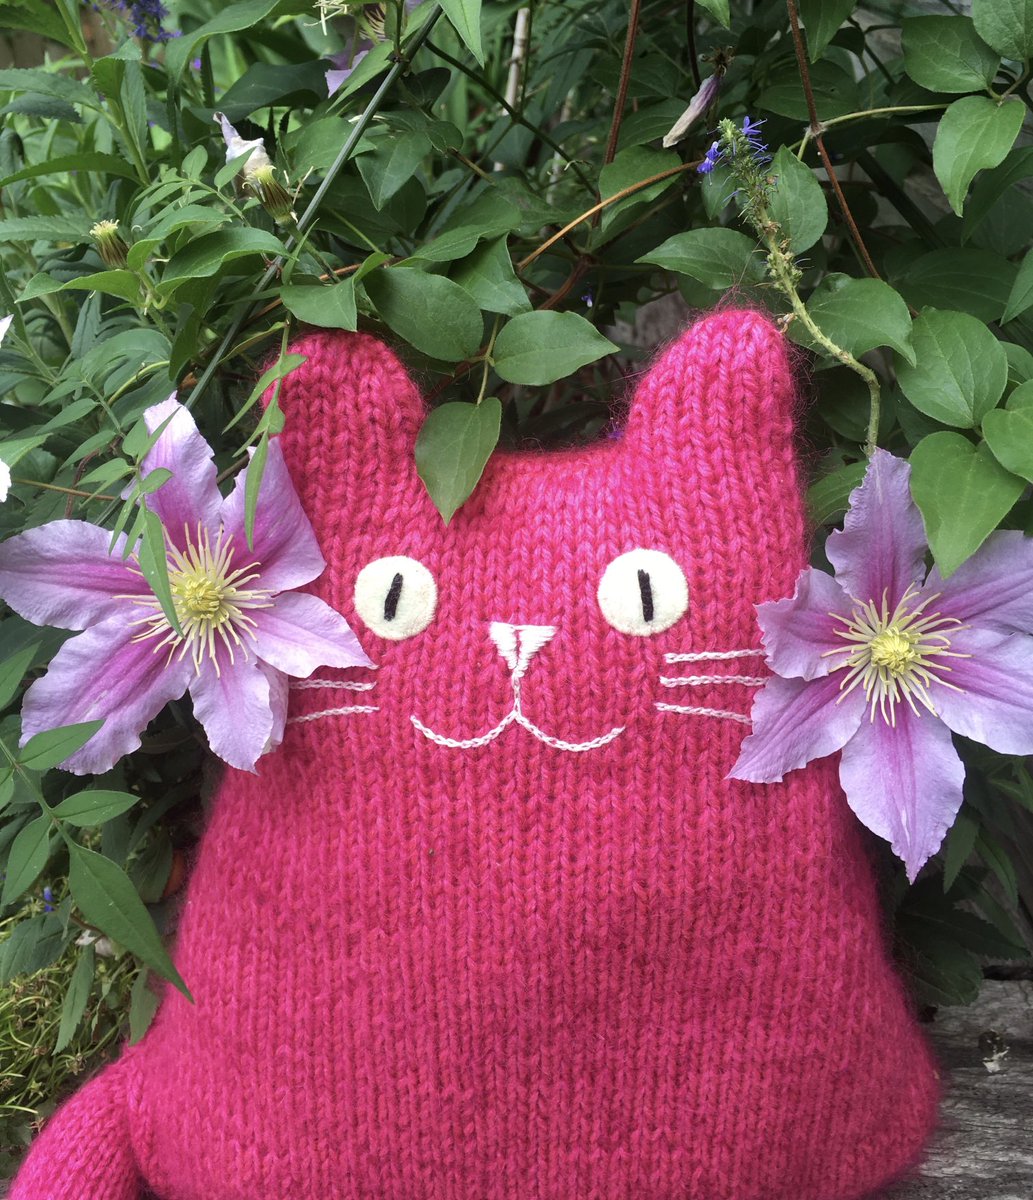 Check our #etsysale #earlybiz #cats #catsoftwitter #ukgifthour #giftfinder #shopindie #etsyshop